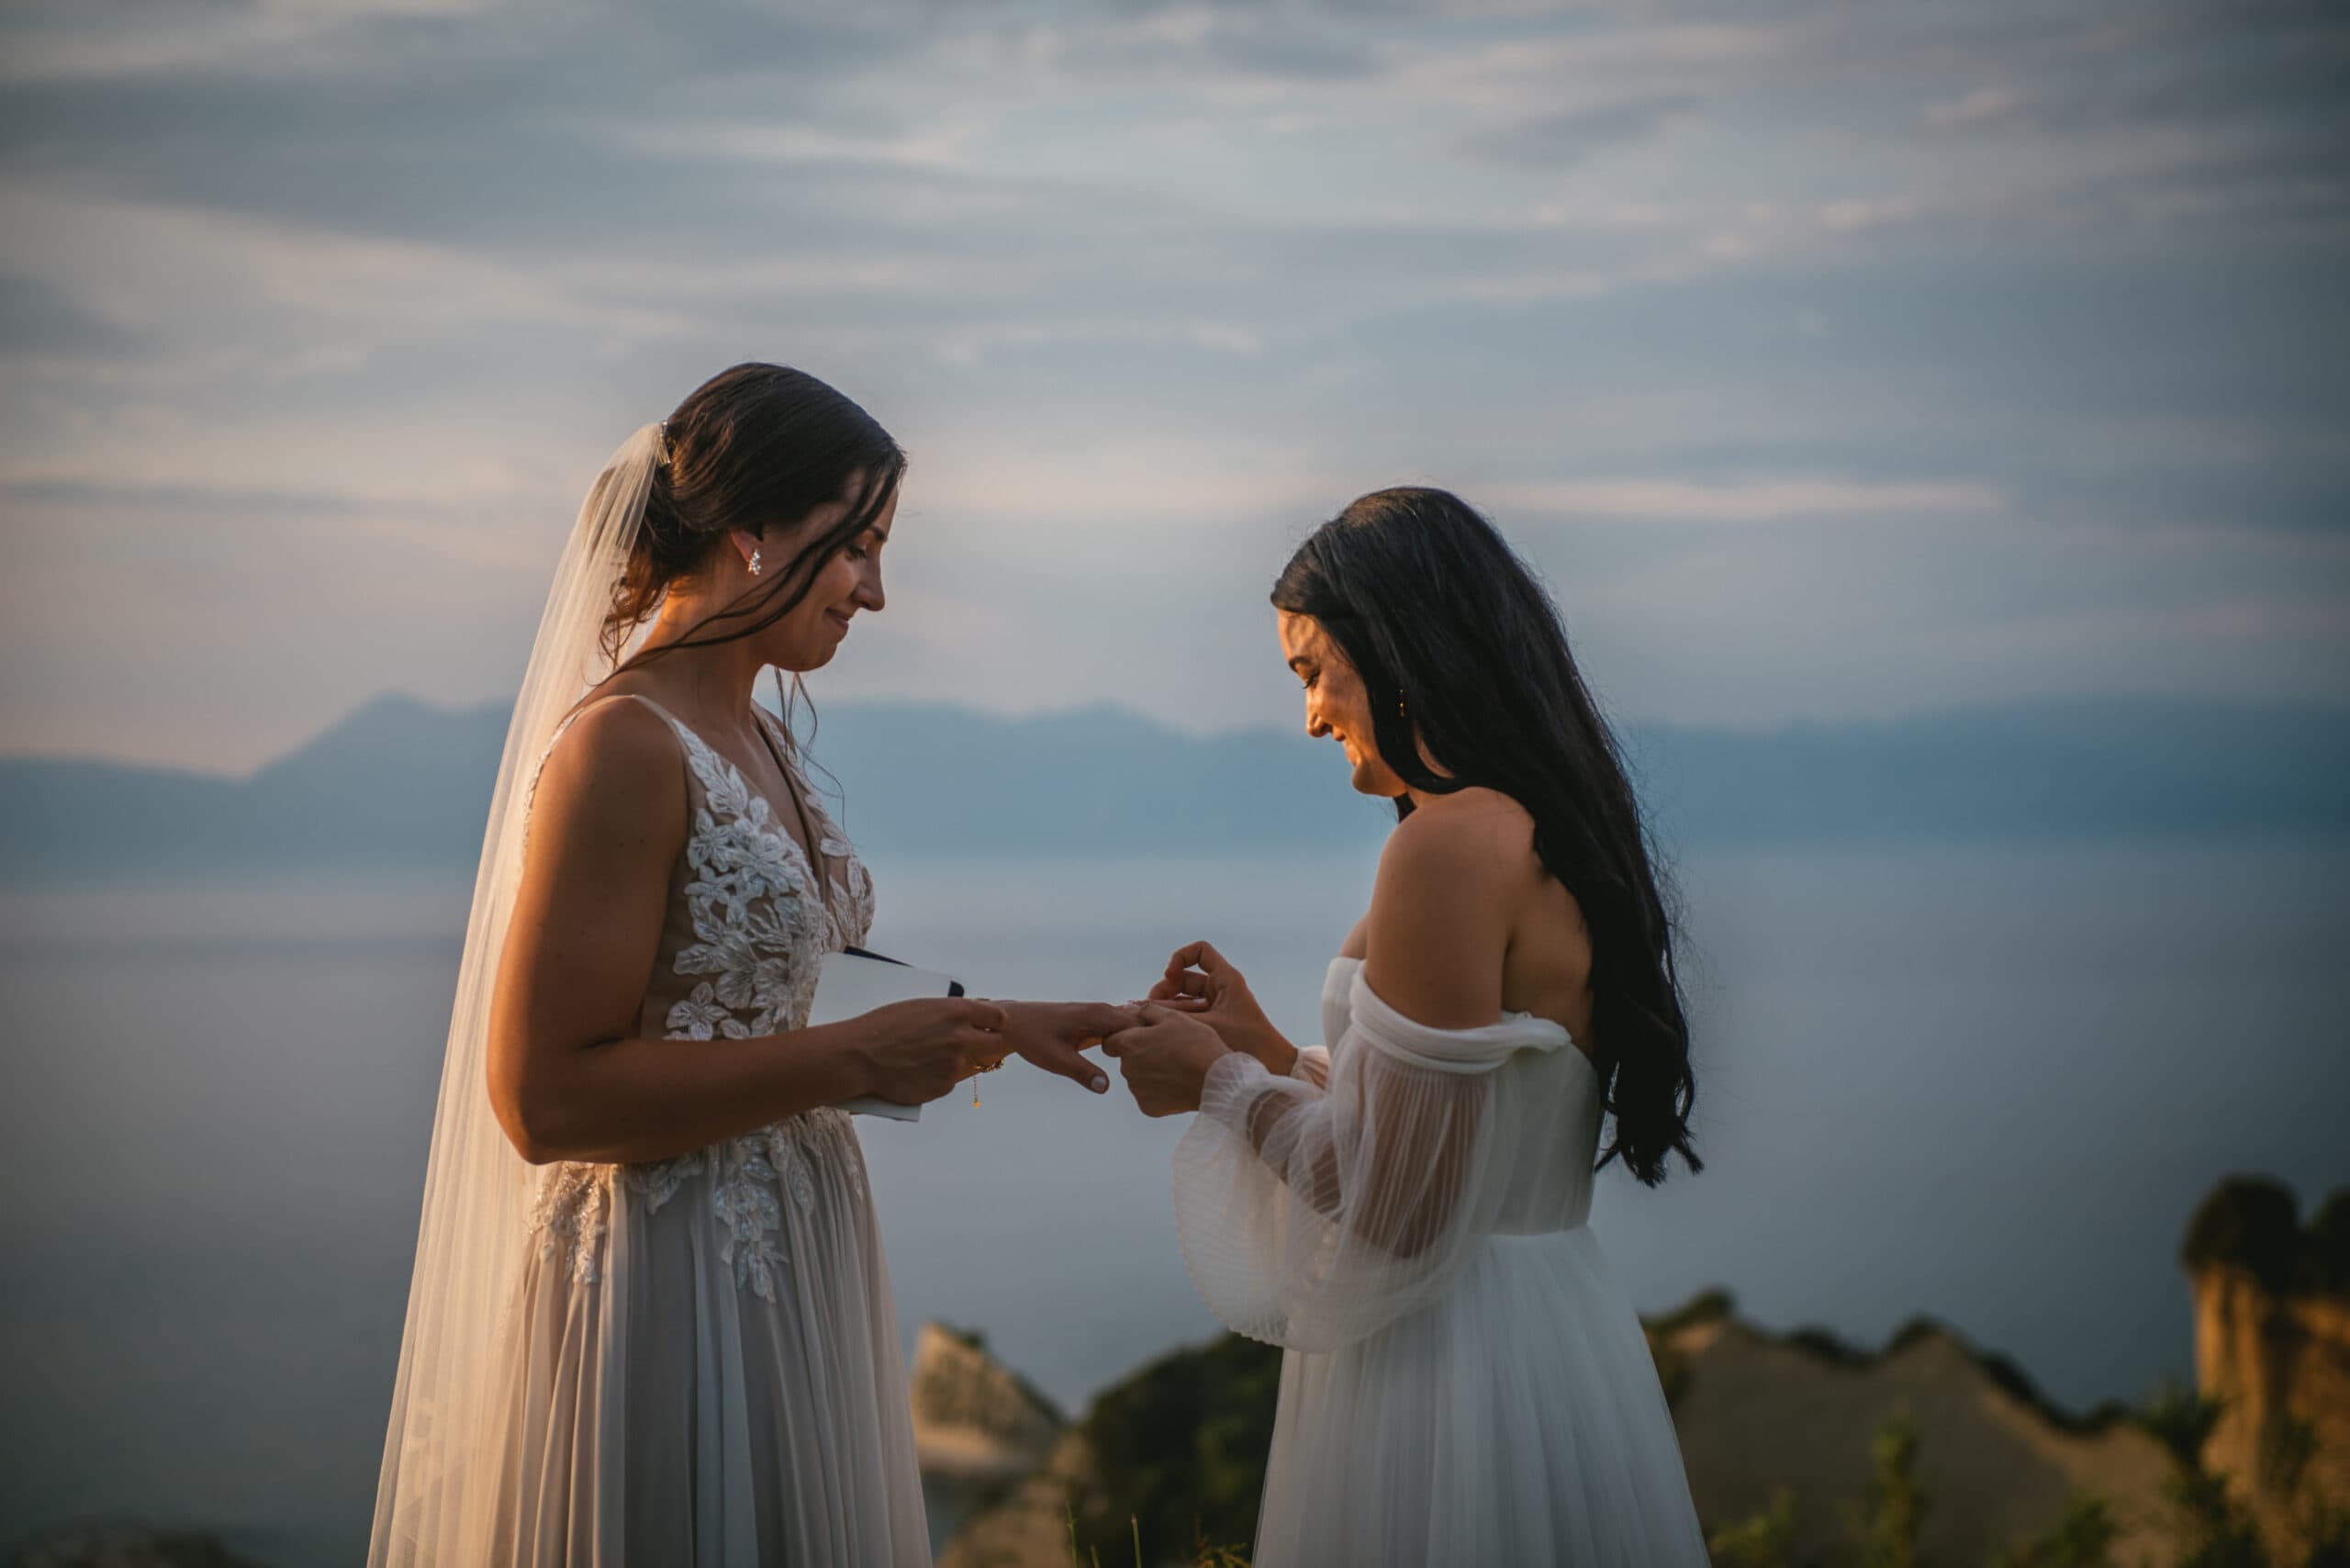 A touching moment as rings are exchanged in the Corfu elopement ceremony.